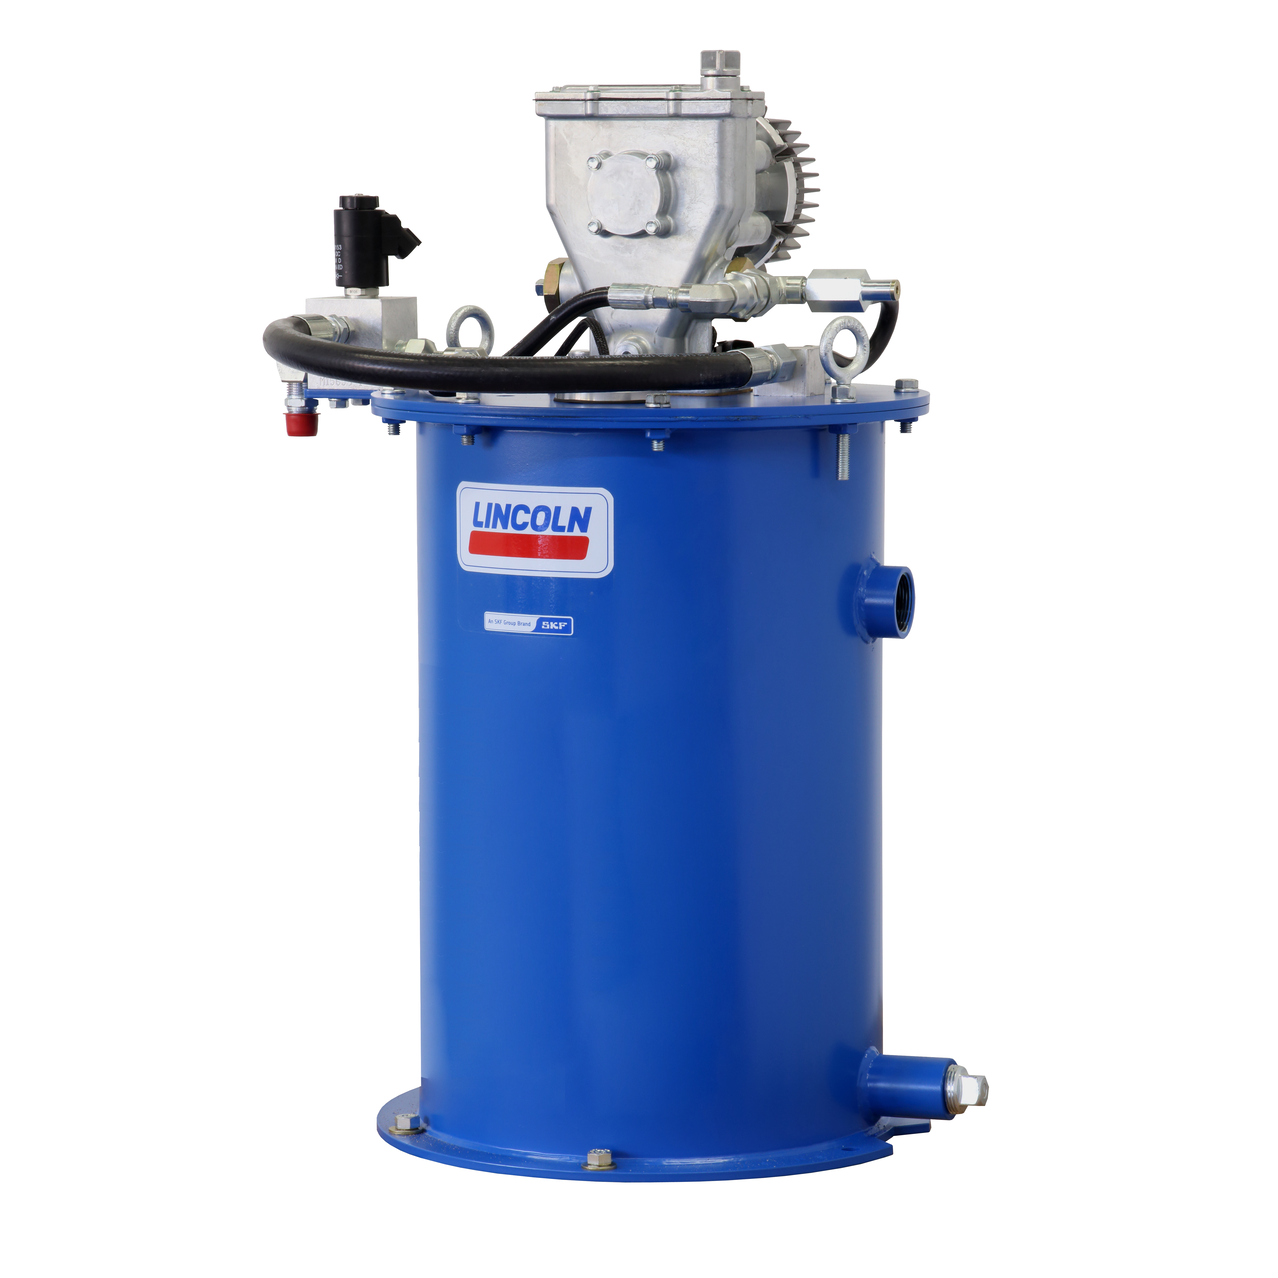 FLOWMASTER Electrically/Hydraulically operated pump